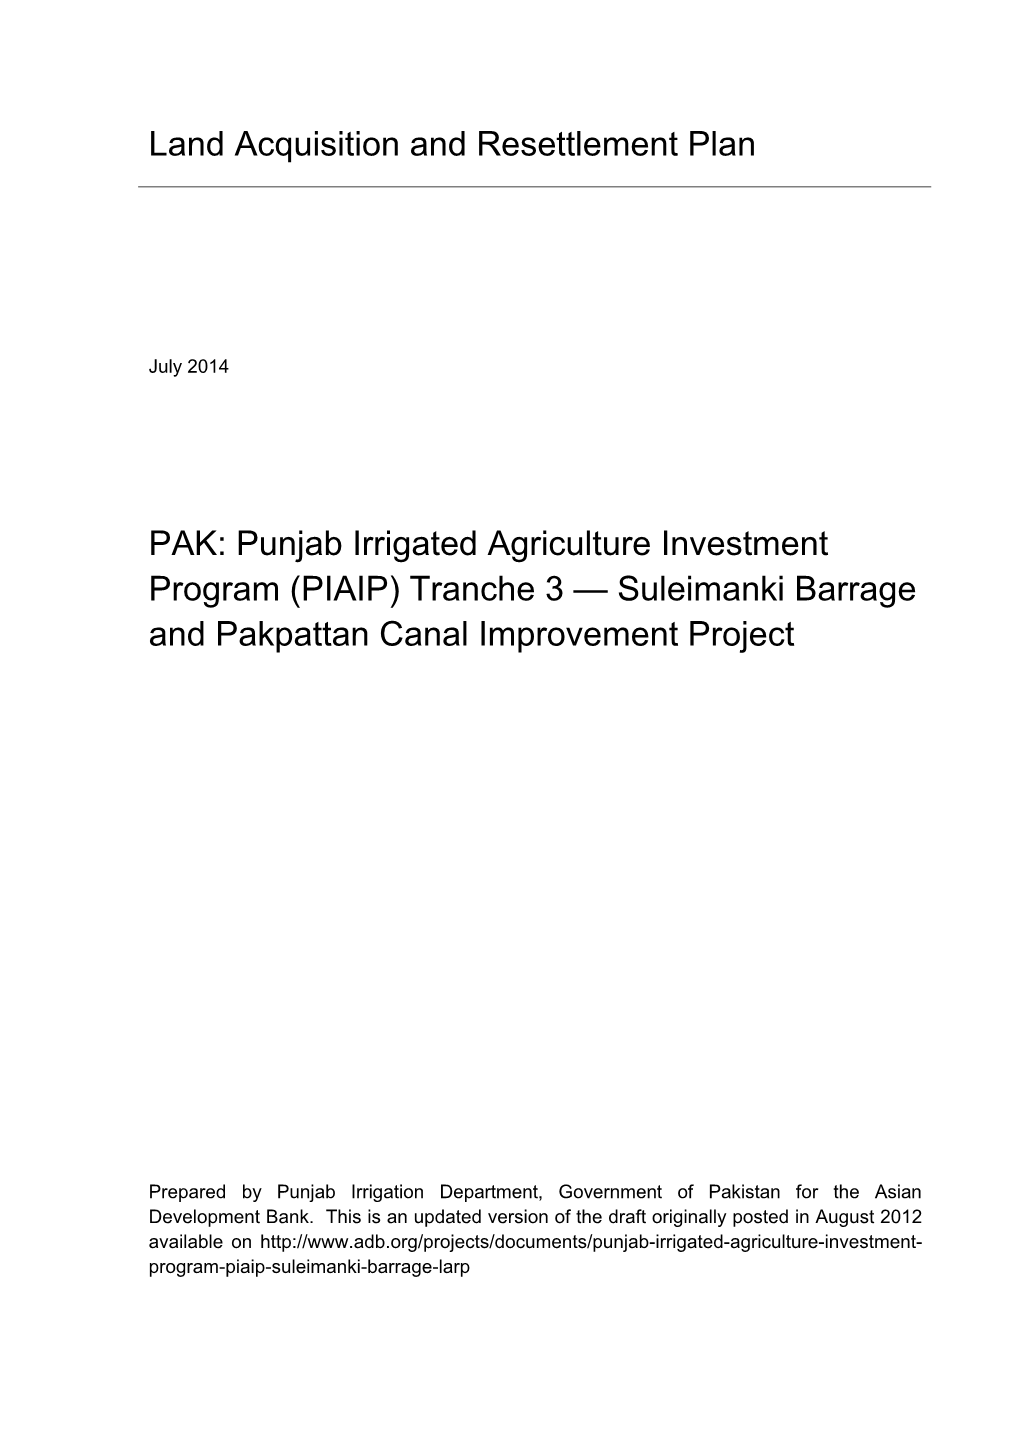 Punjab Irrigated Agriculture Investment Program (PIAIP) Tranche 3 — Suleimanki Barrage and Pakpattan Canal Improvement Project